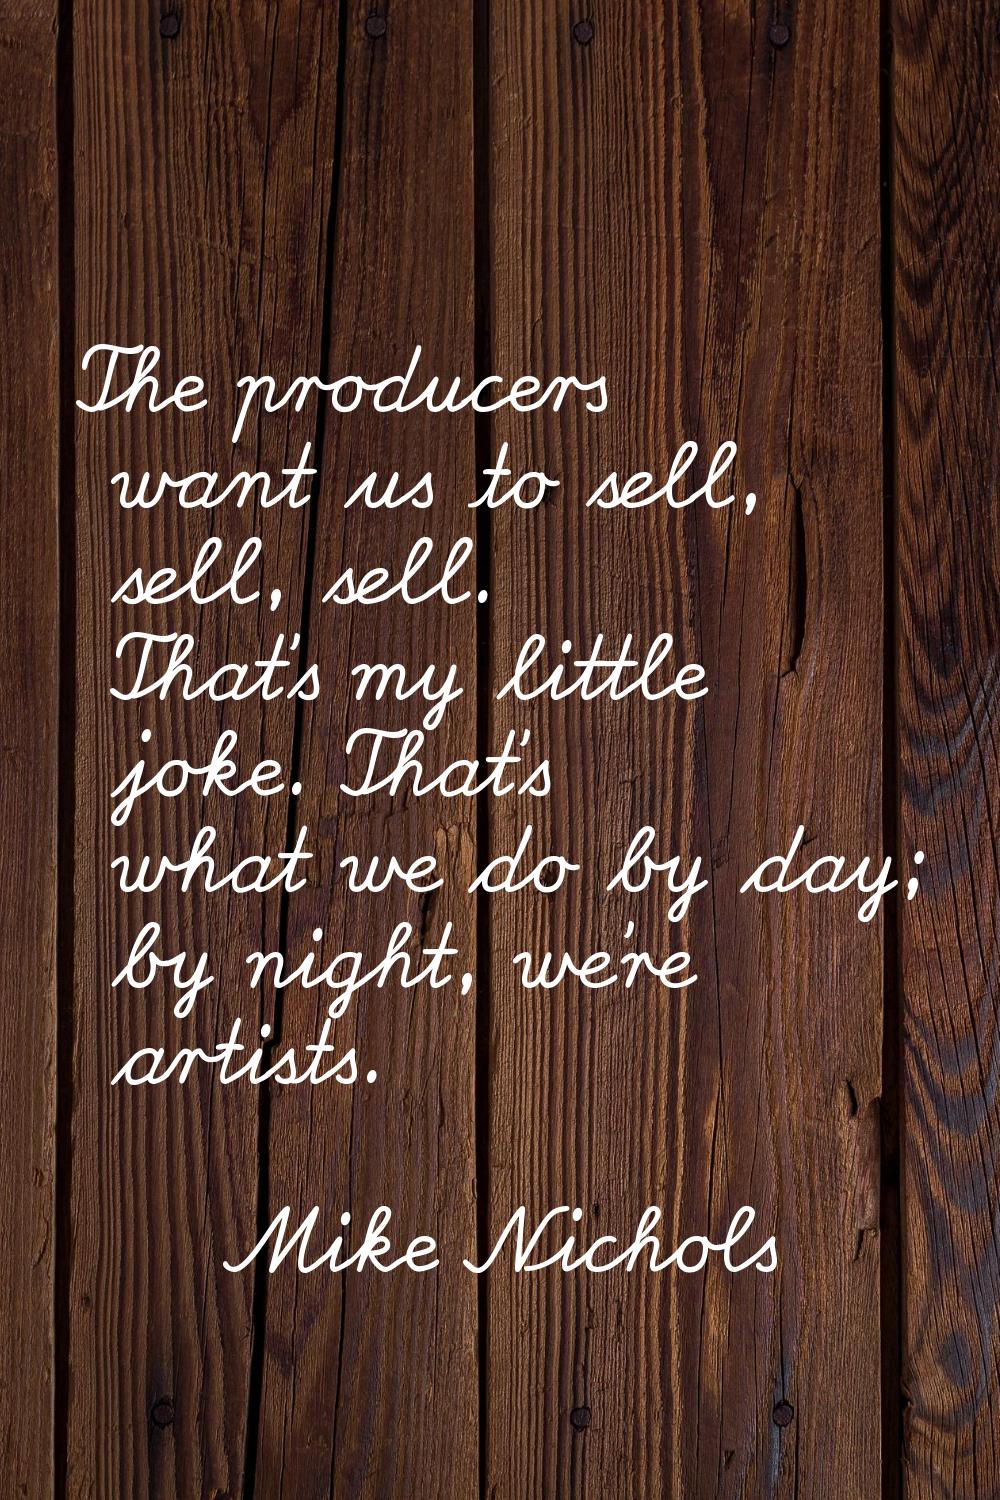 The producers want us to sell, sell, sell. That's my little joke. That's what we do by day; by nigh